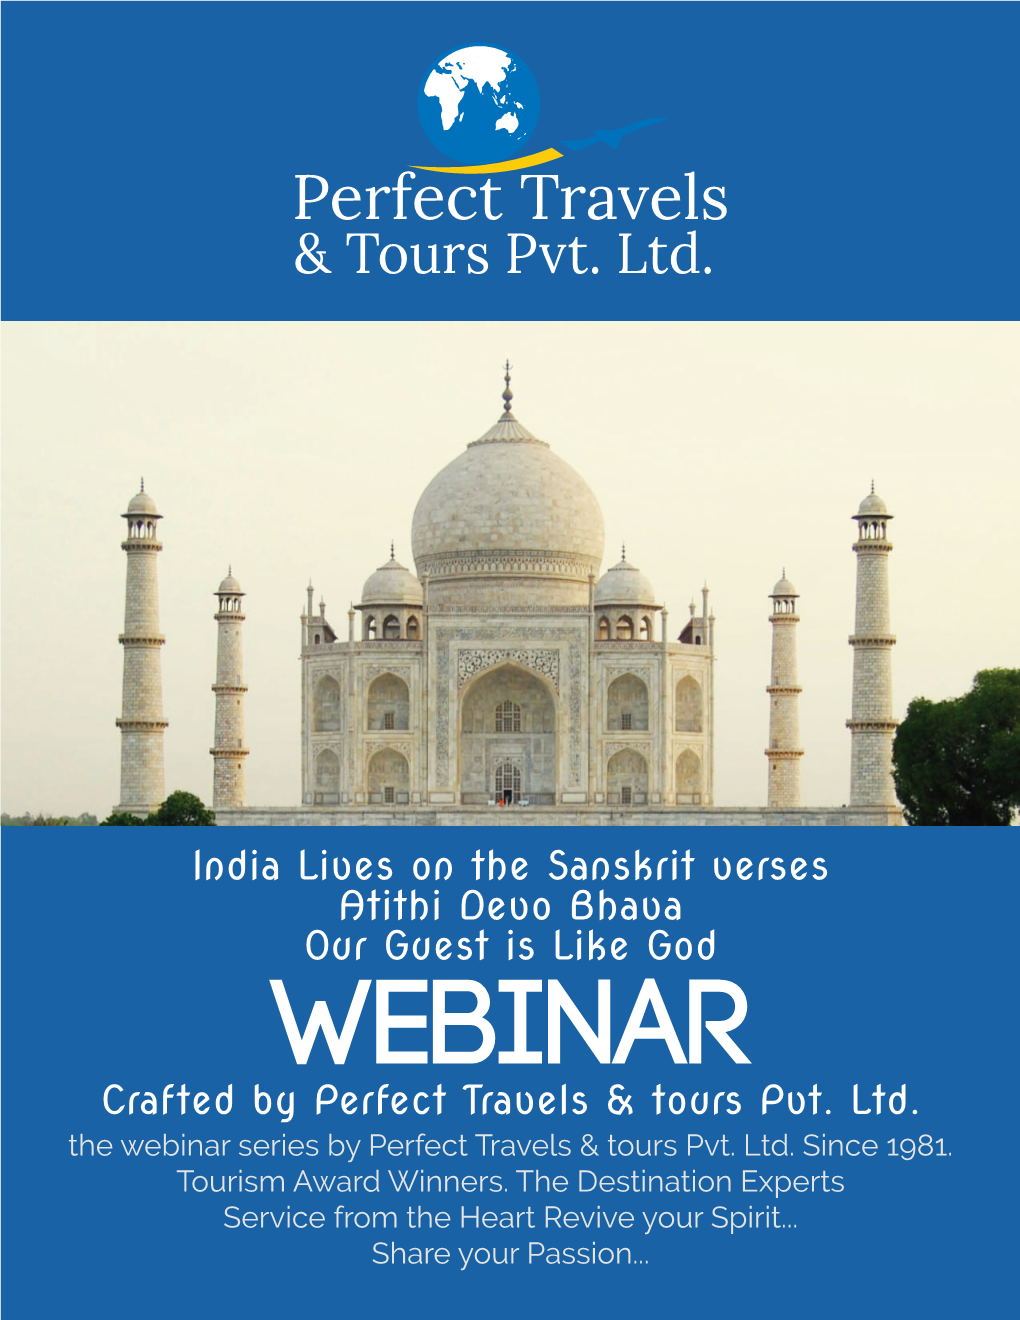 WEBINAR Crafted by Perfect Travels & Tours Pvt